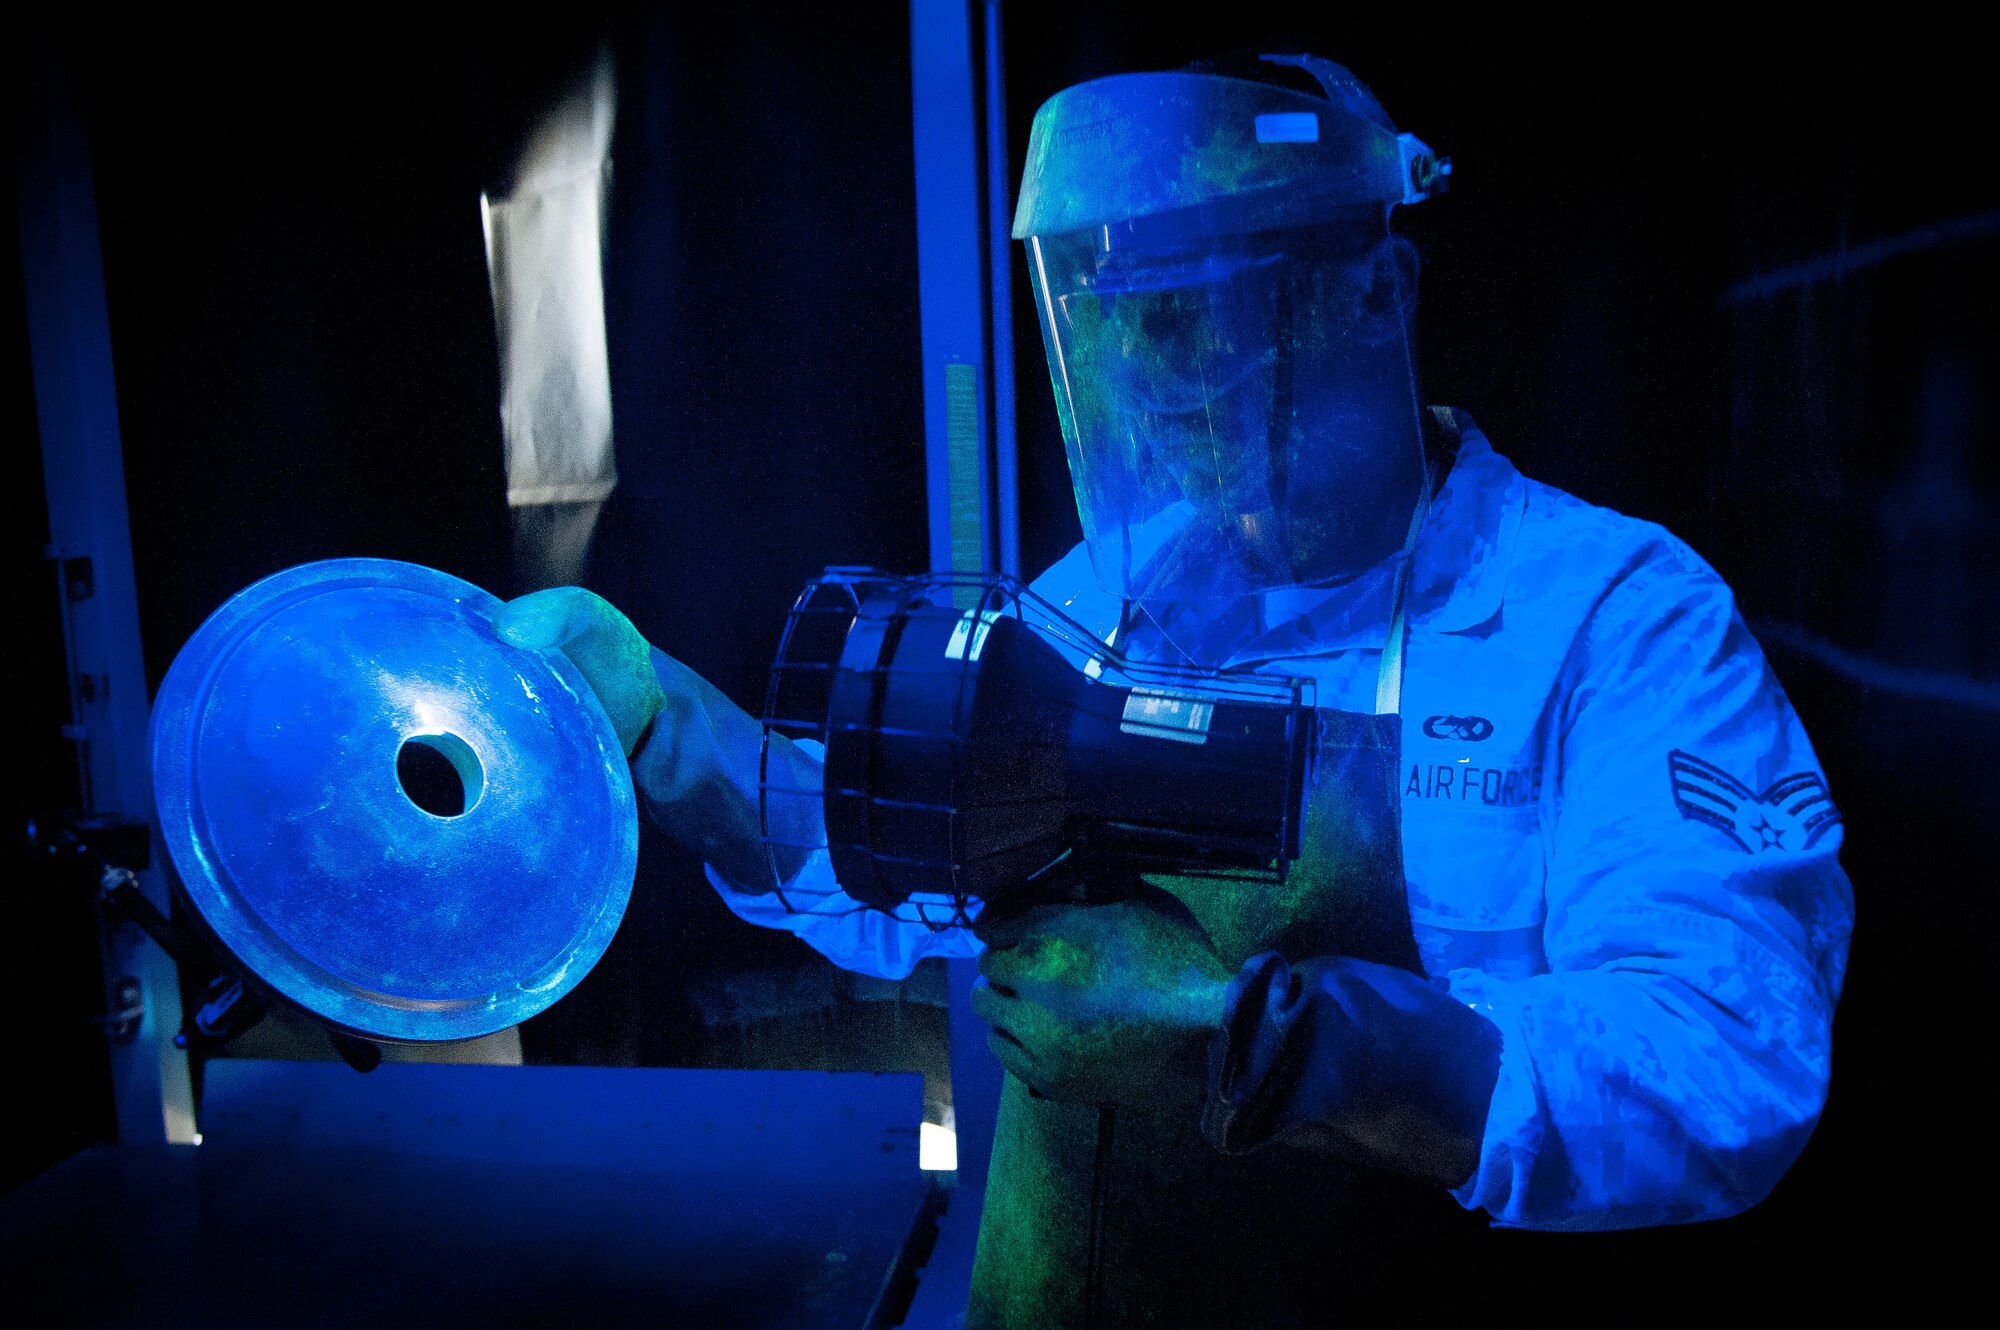 Senior Airman Nathan Talamantez, 51st Maintenance Squadron non-destructive inspection journeyman, inspects a brake housing for a cracks at Osan Air Base, Republic of Korea, June 28, 2016. Talamantez identifies damages aircraft parts before returning them to be repaired or replaced. Talamantez is assigned to the non-destructive inspection shop and is part of the fabrication flight which also has structural maintenance shop and metals technology. Fabrication flight Airmen identify, repair and build parts to working order so that Osan airframes are ready to fight tonight. (U.S. Air Force photo by Staff Sgt. Jonathan Steffen/Released)